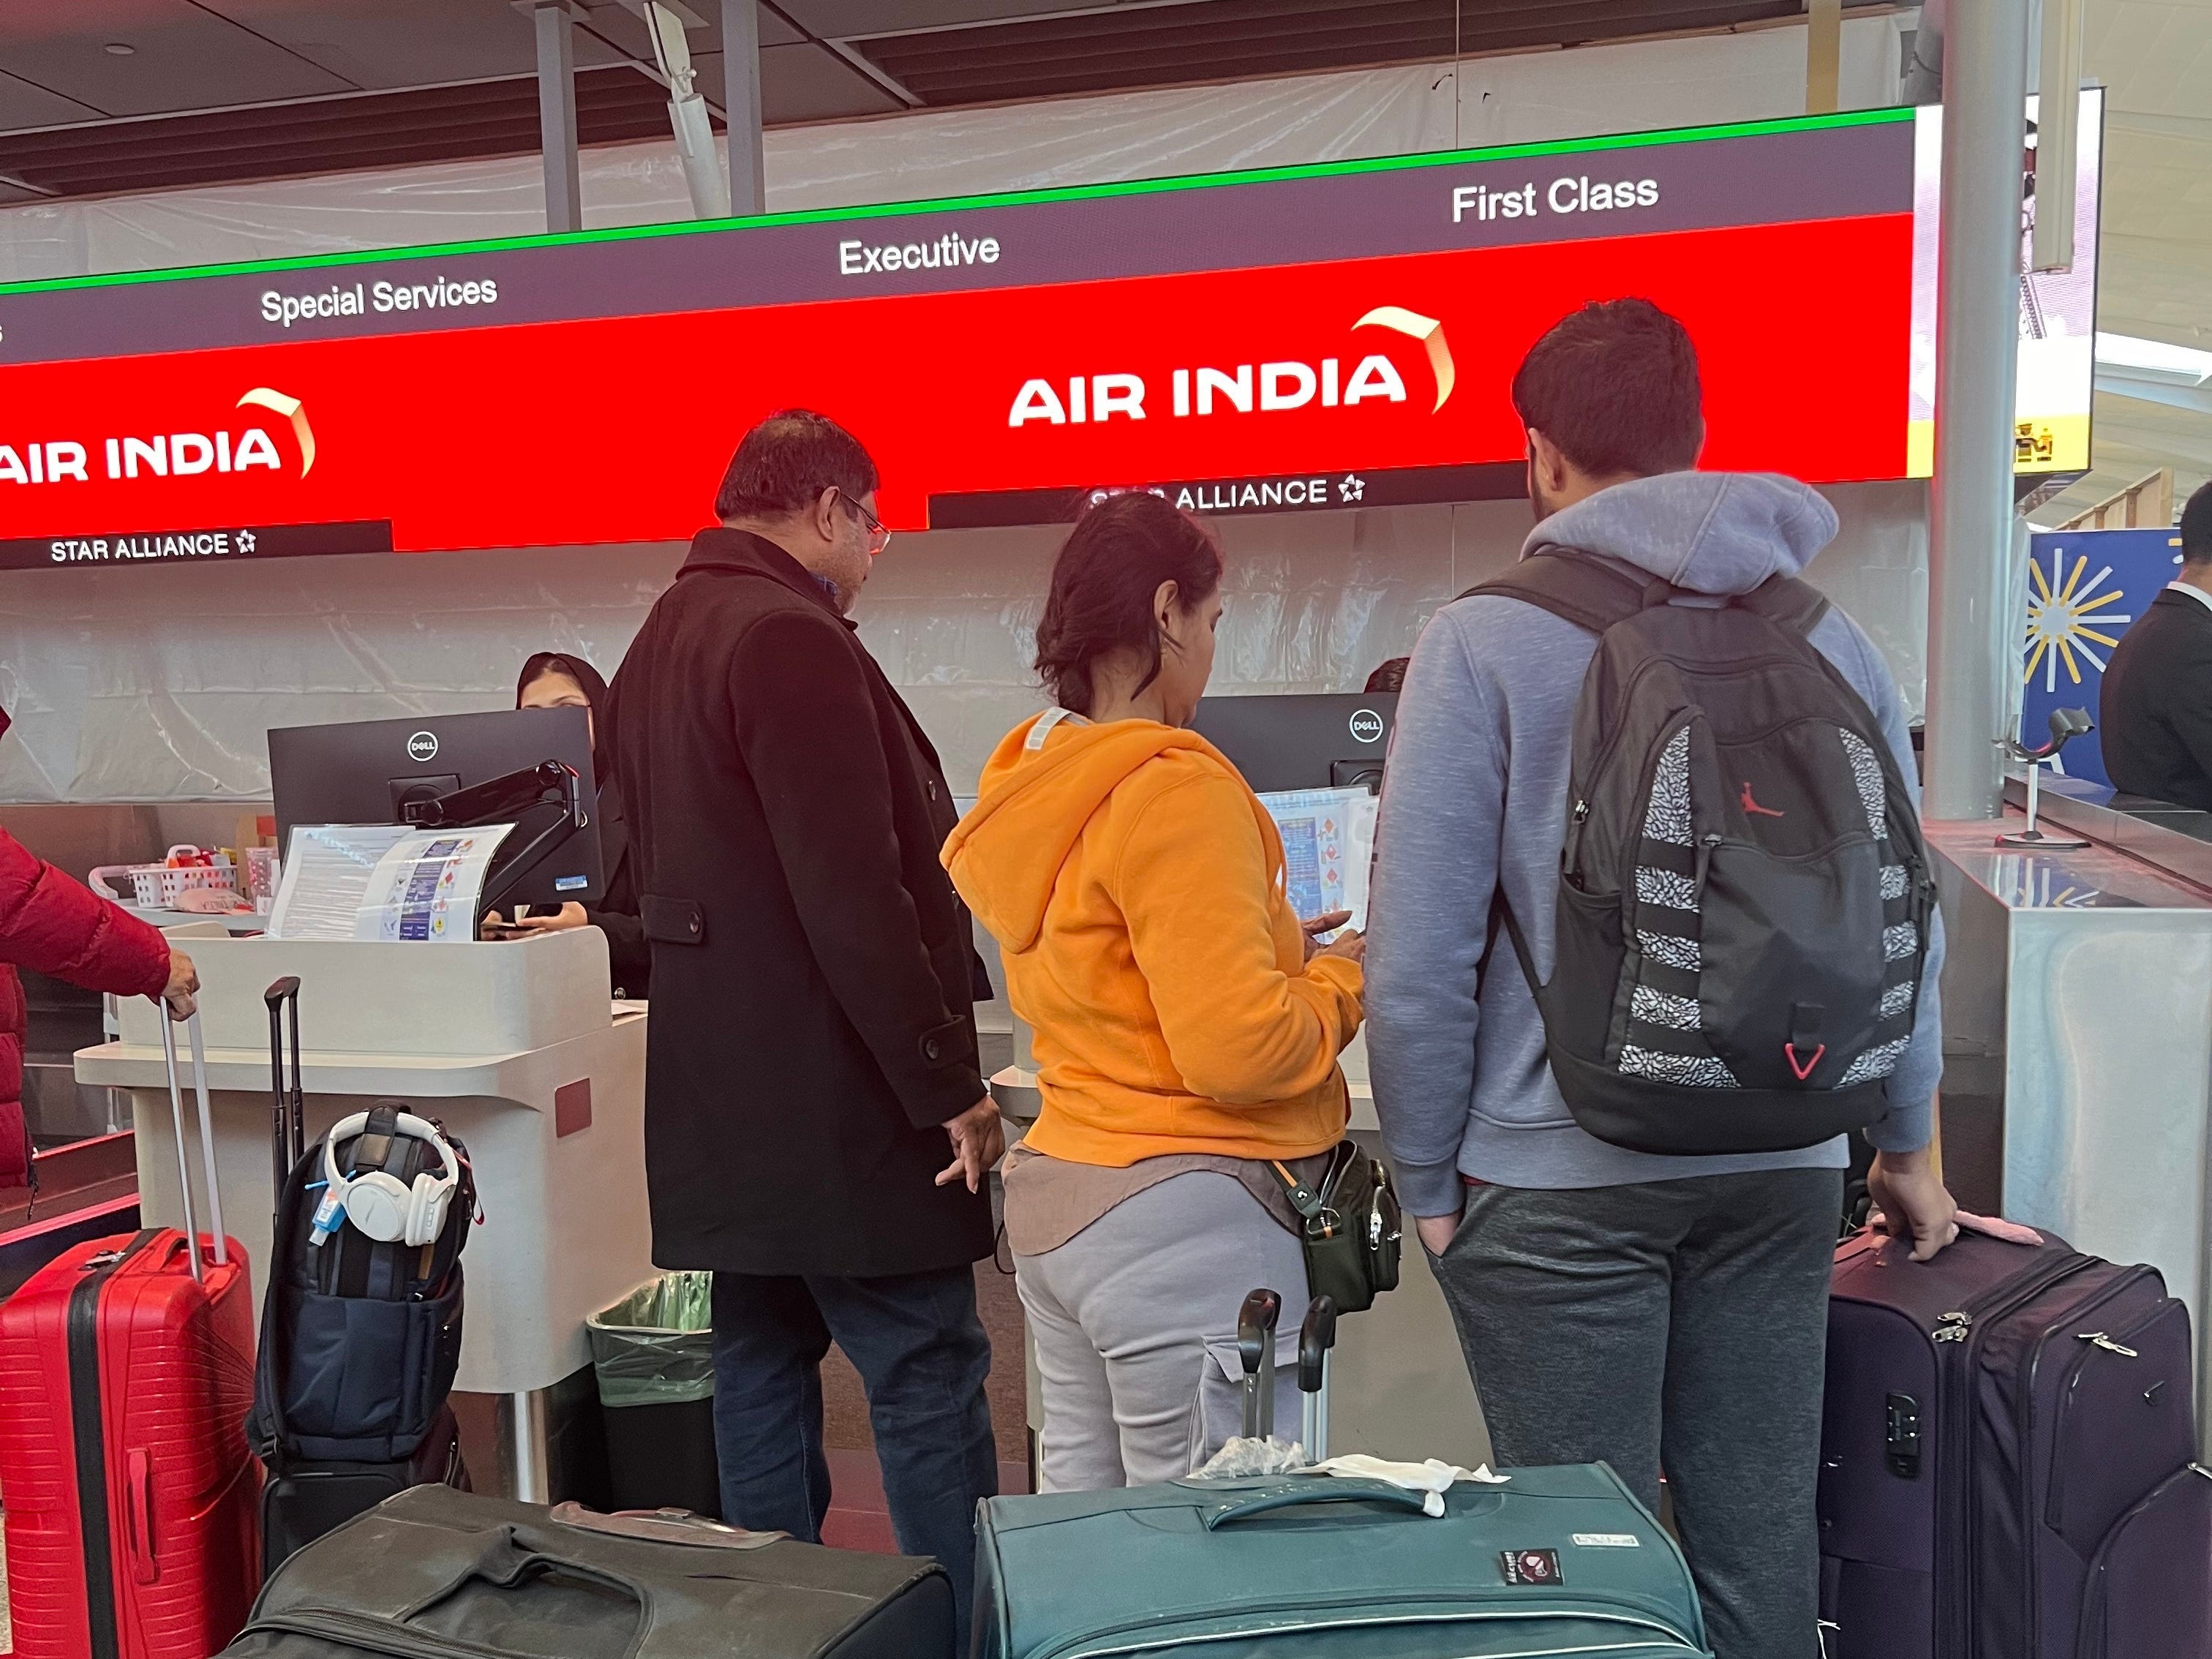 <p>A long line of economy travelers queued with mountains of luggage, so I'd budget extra time for check-in if you cannot get your boarding pass on the app or need to check bags.</p>